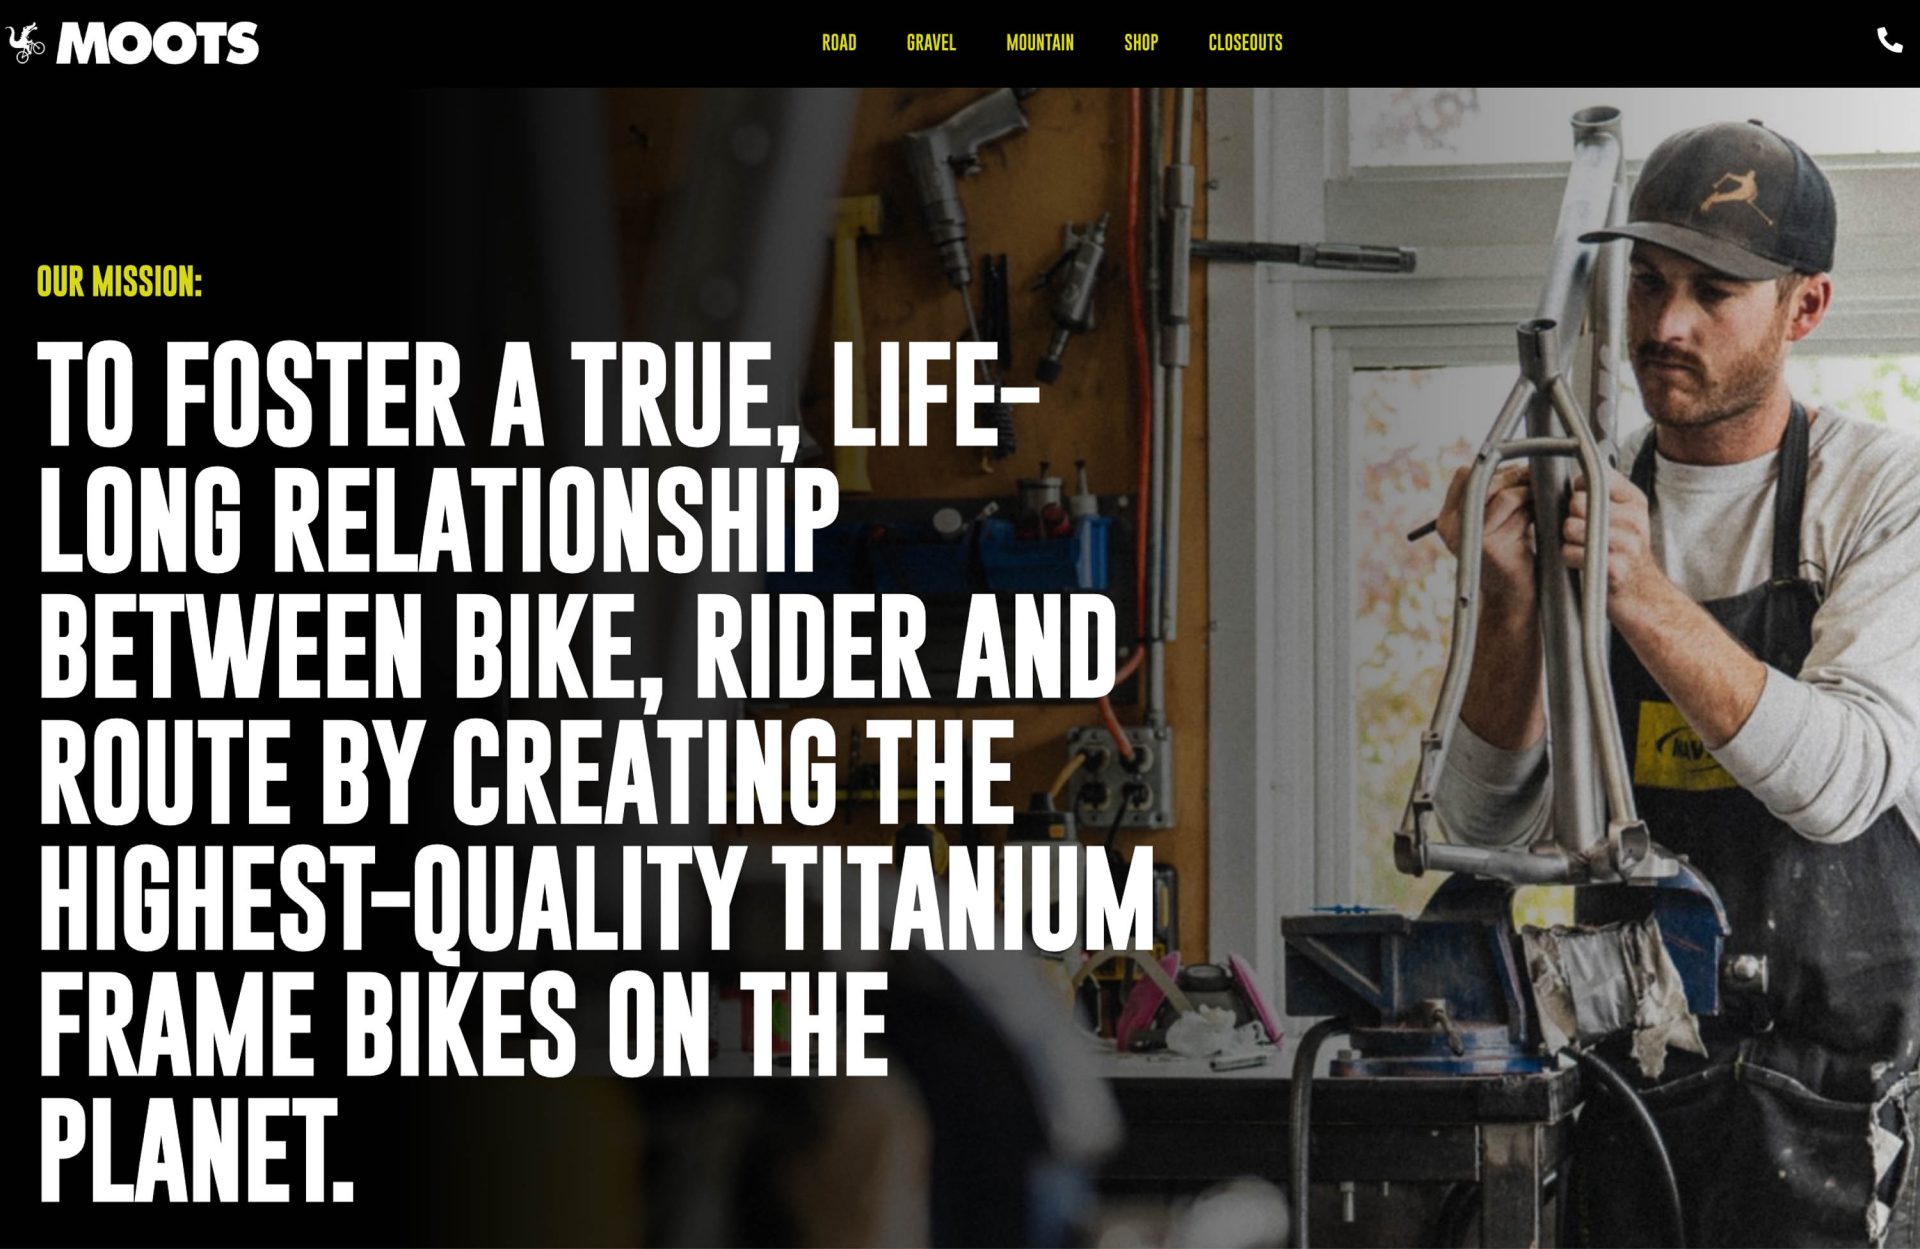 Screengrab from the Moots web site with a photo of a worker and frame on the factory floor. The large-print marketing copy reads "Our Mission: To foster a true, life-long relationship between bike, rider and route by creating the highest-quality titanium bike frames on the planet."